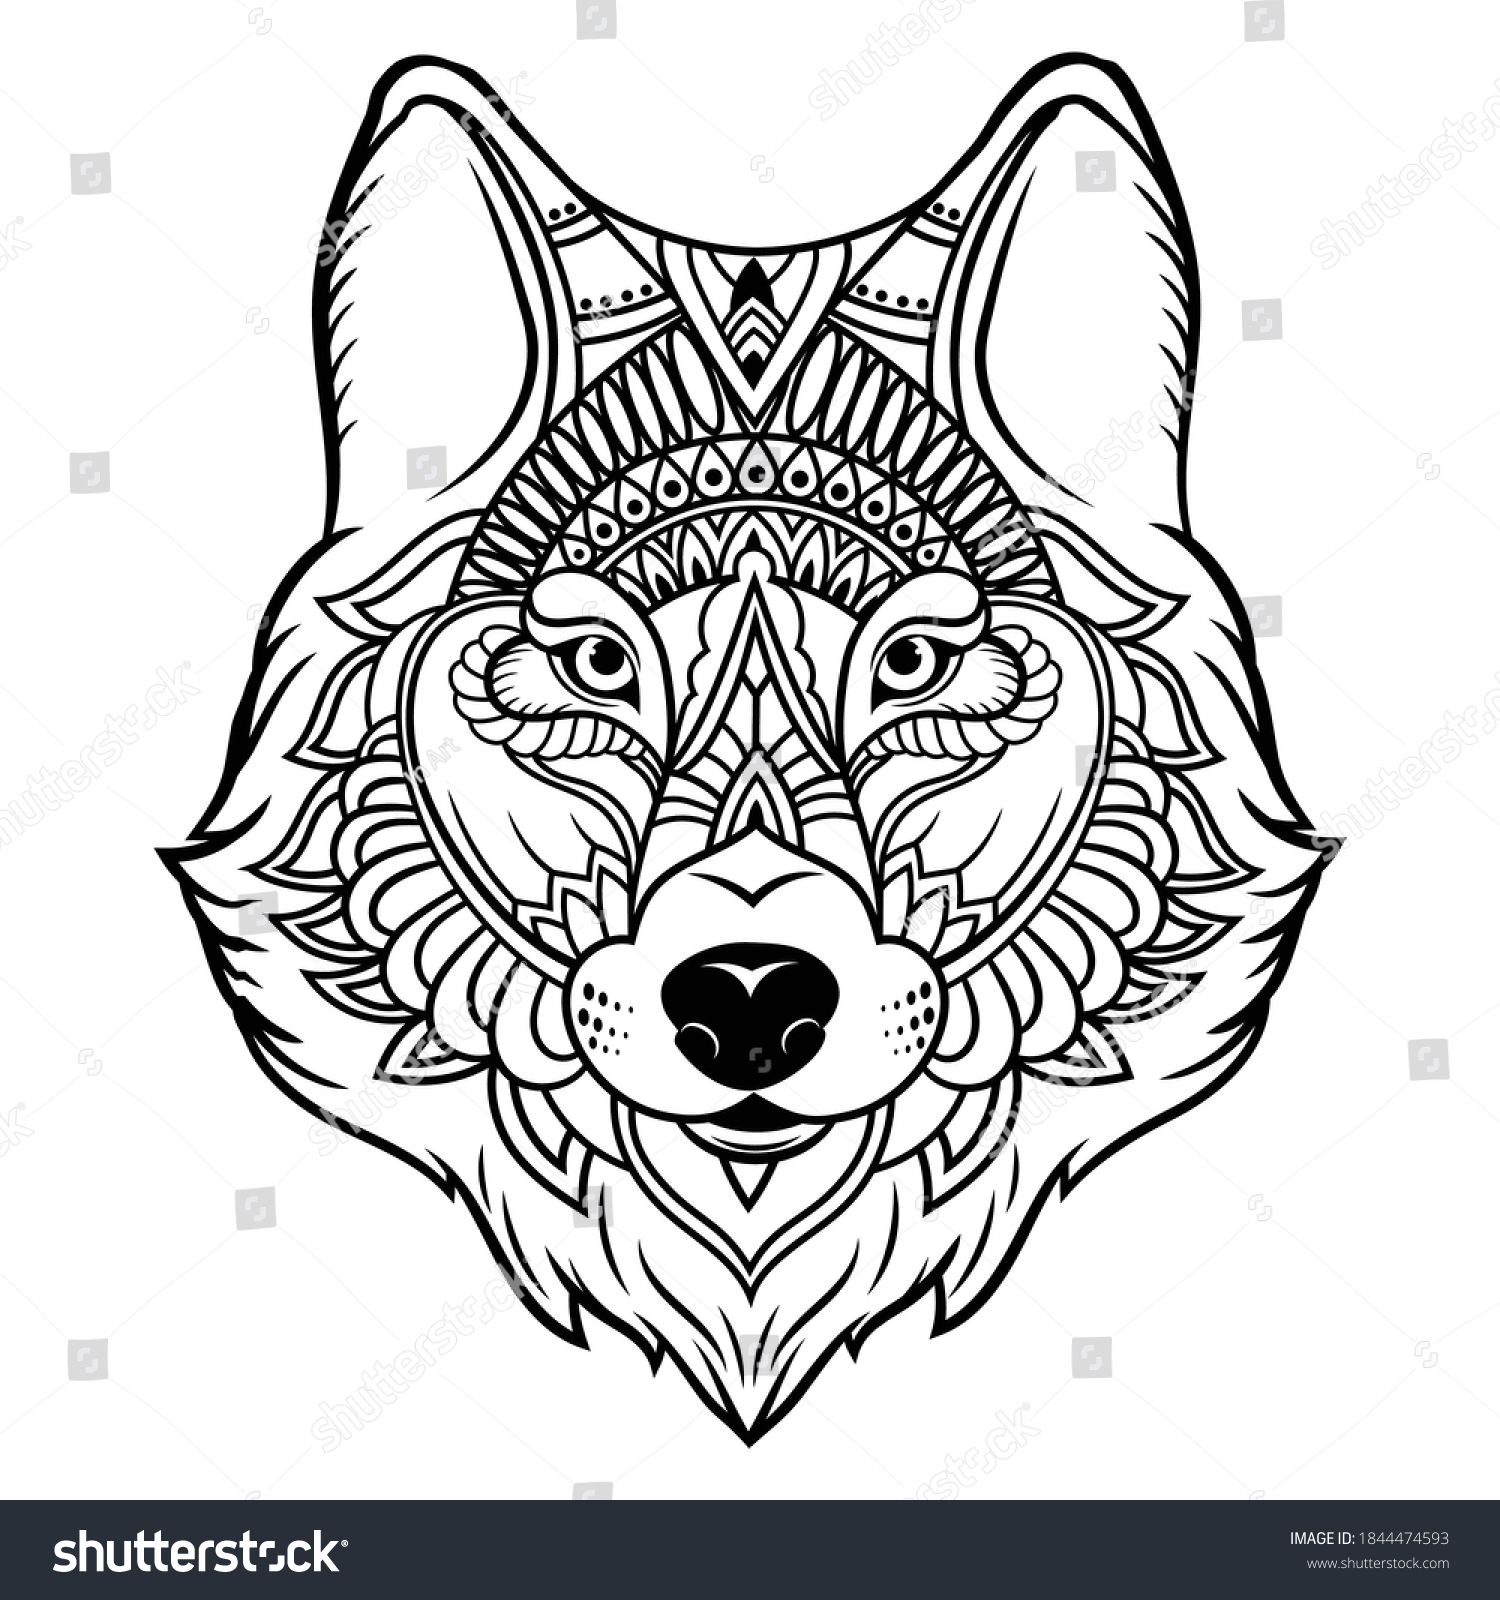 SVG of Portrait of a wolf. Illustration of a zentangle head a dog. Stylized portrait of a wolf. Black and white hand drawn. Indian wolf. Ethnic wild animals. Tattoo. svg